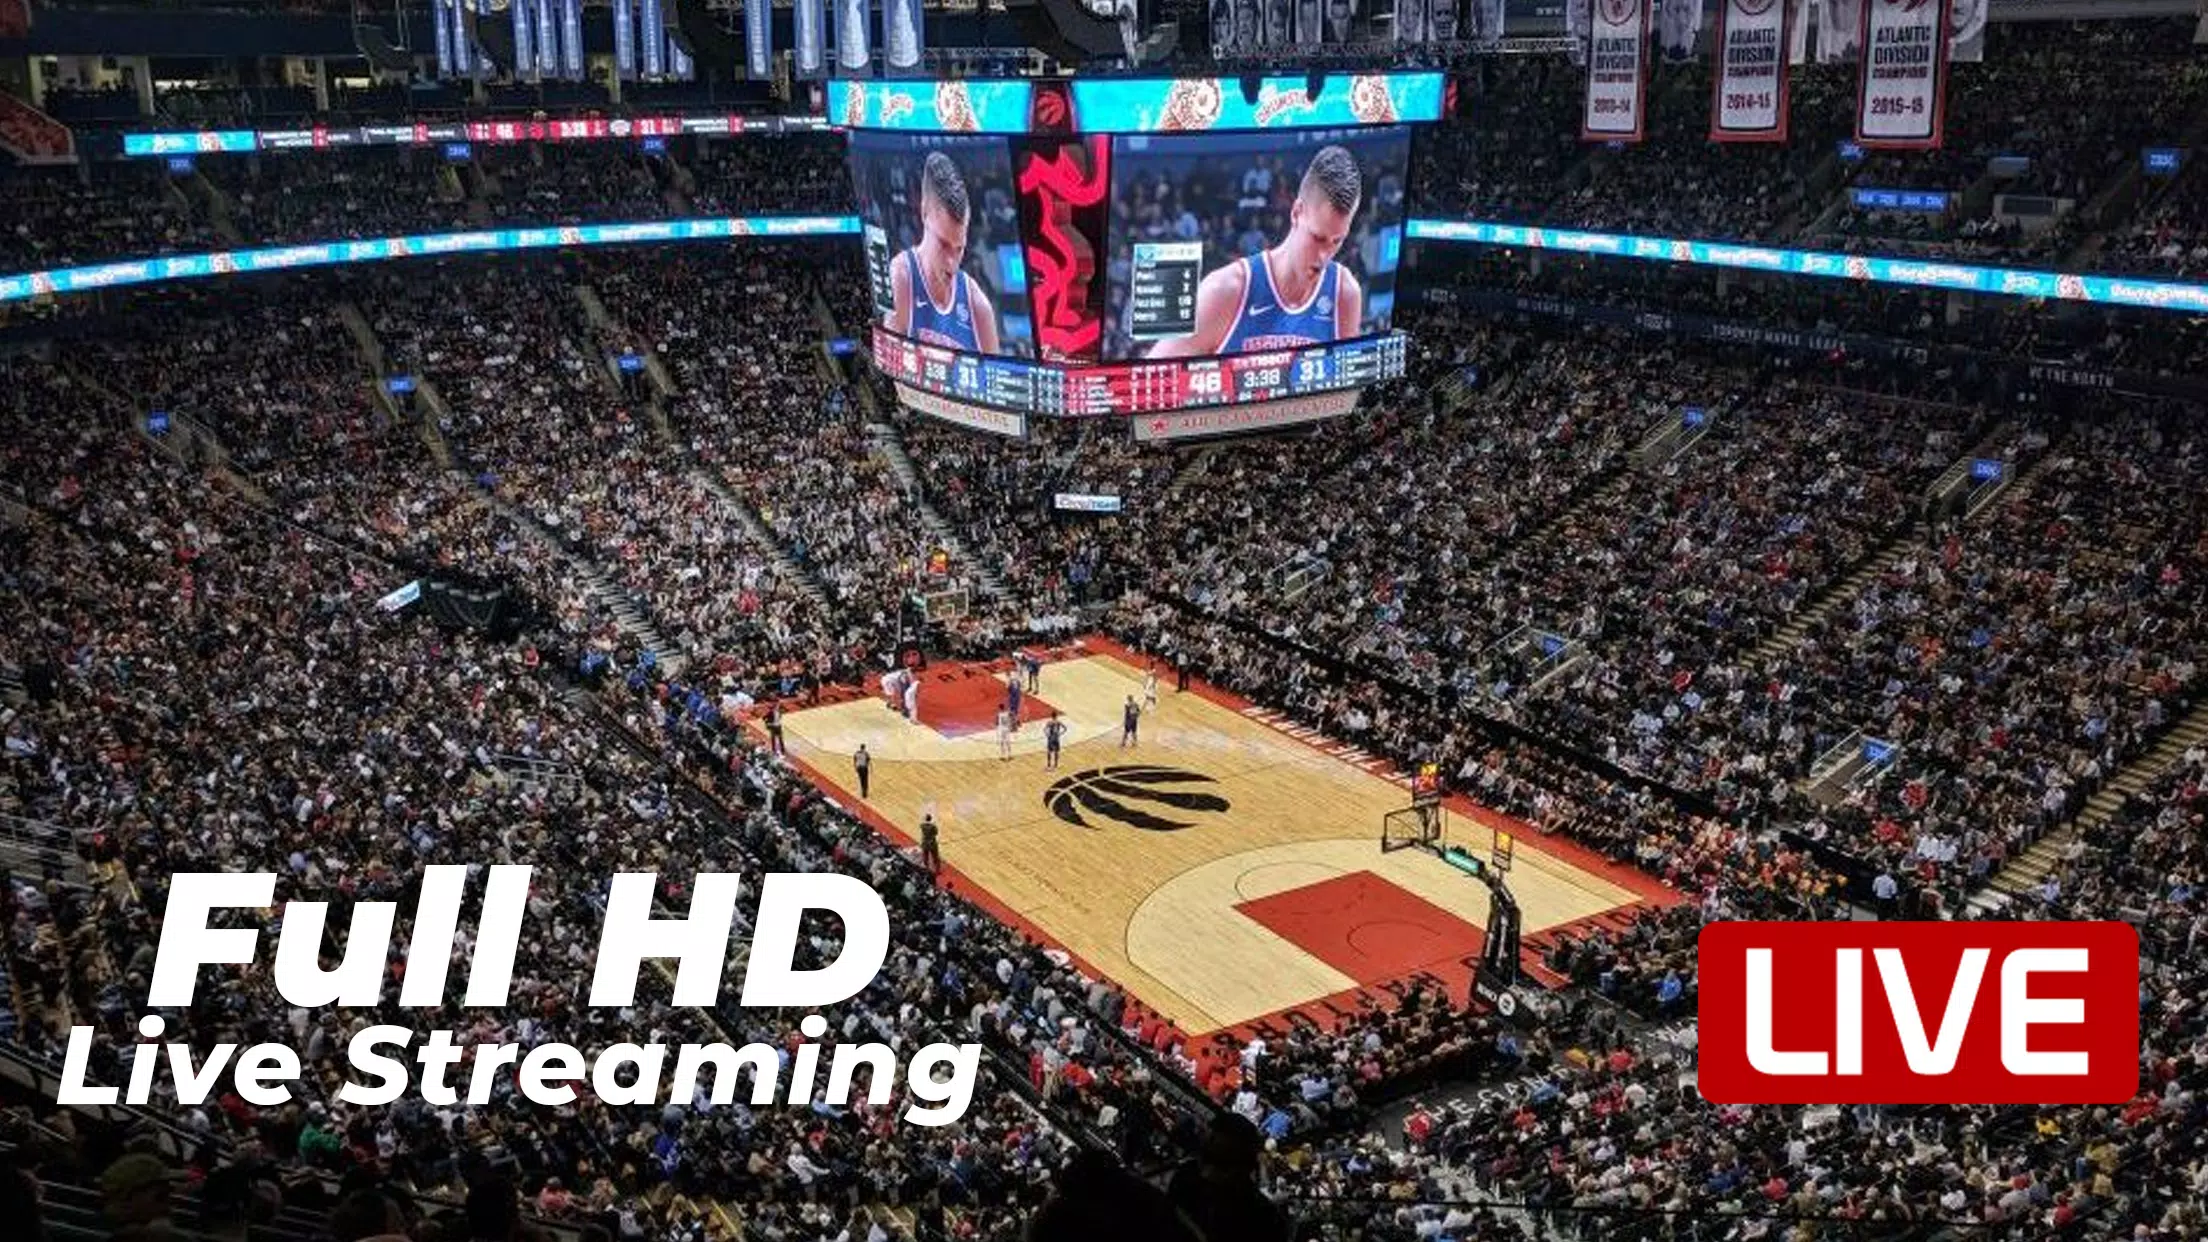 Basketball Live Streaming || Watch NBA Live in HD APK for Android Download